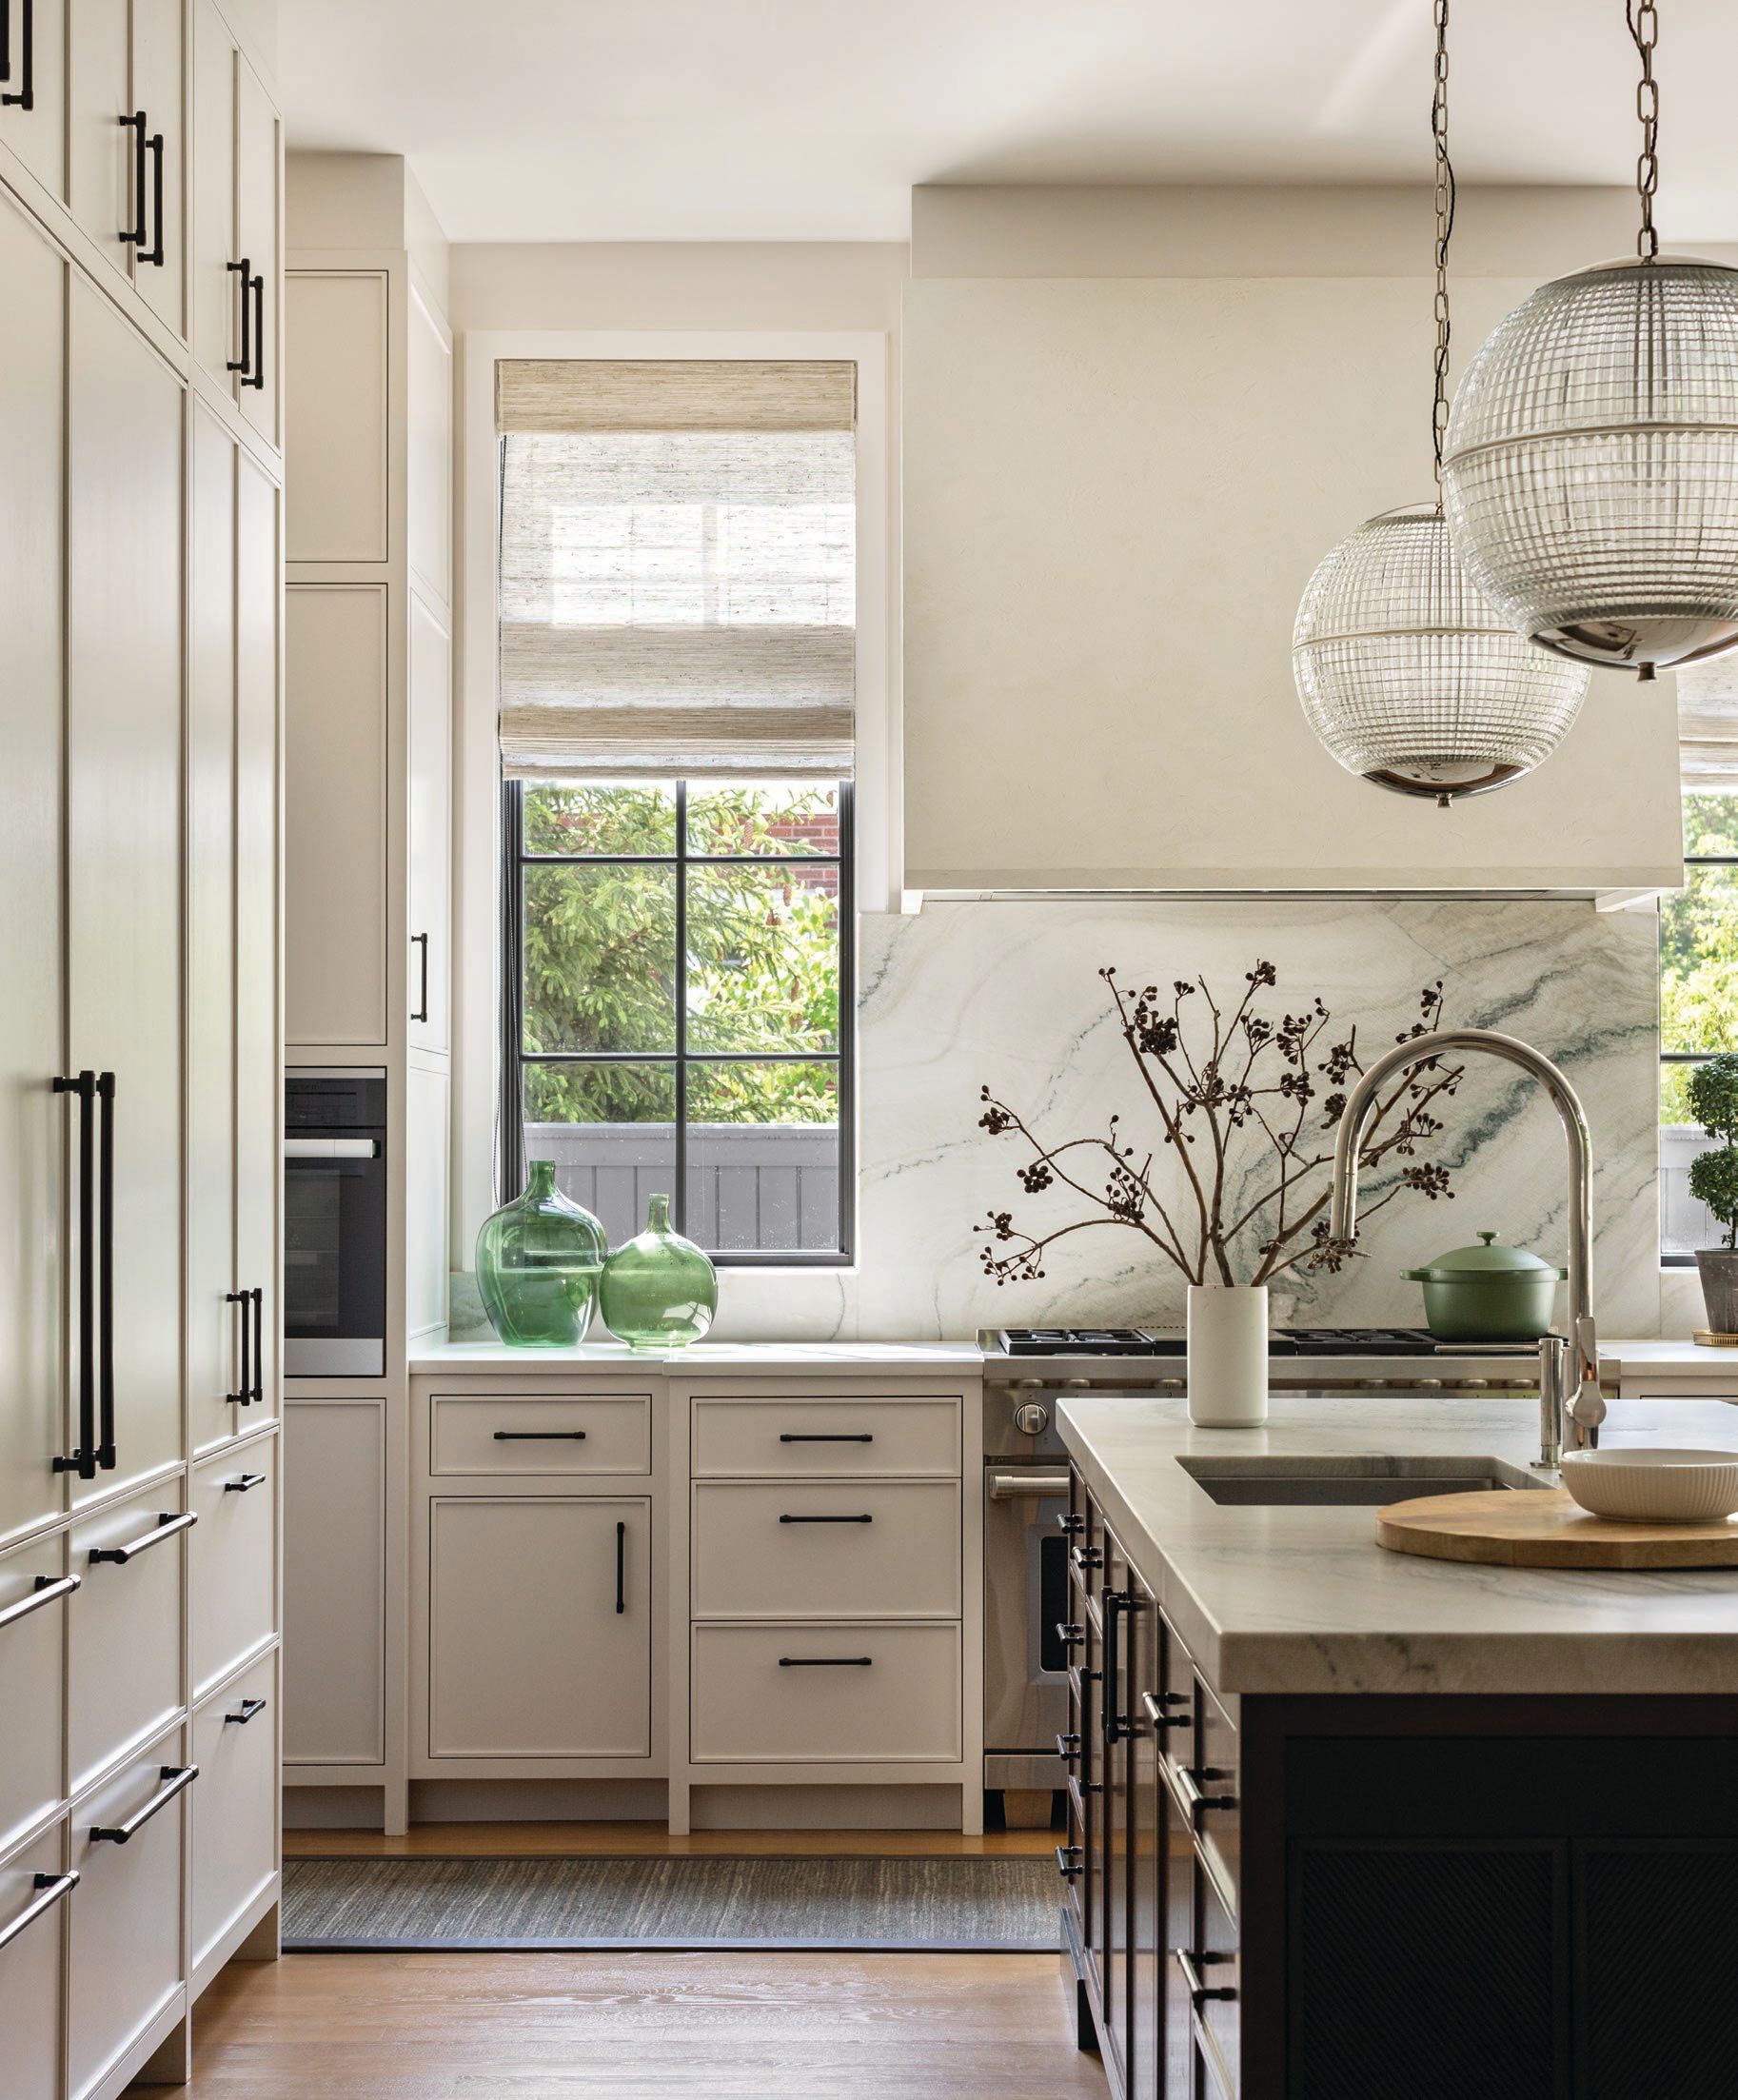 With sleek French ball globe pendants by Ann-Morris and cabinetry by New Style Cabinets, the kitchen is the picture of sophistication. Photographed by Aimée Mazzenga